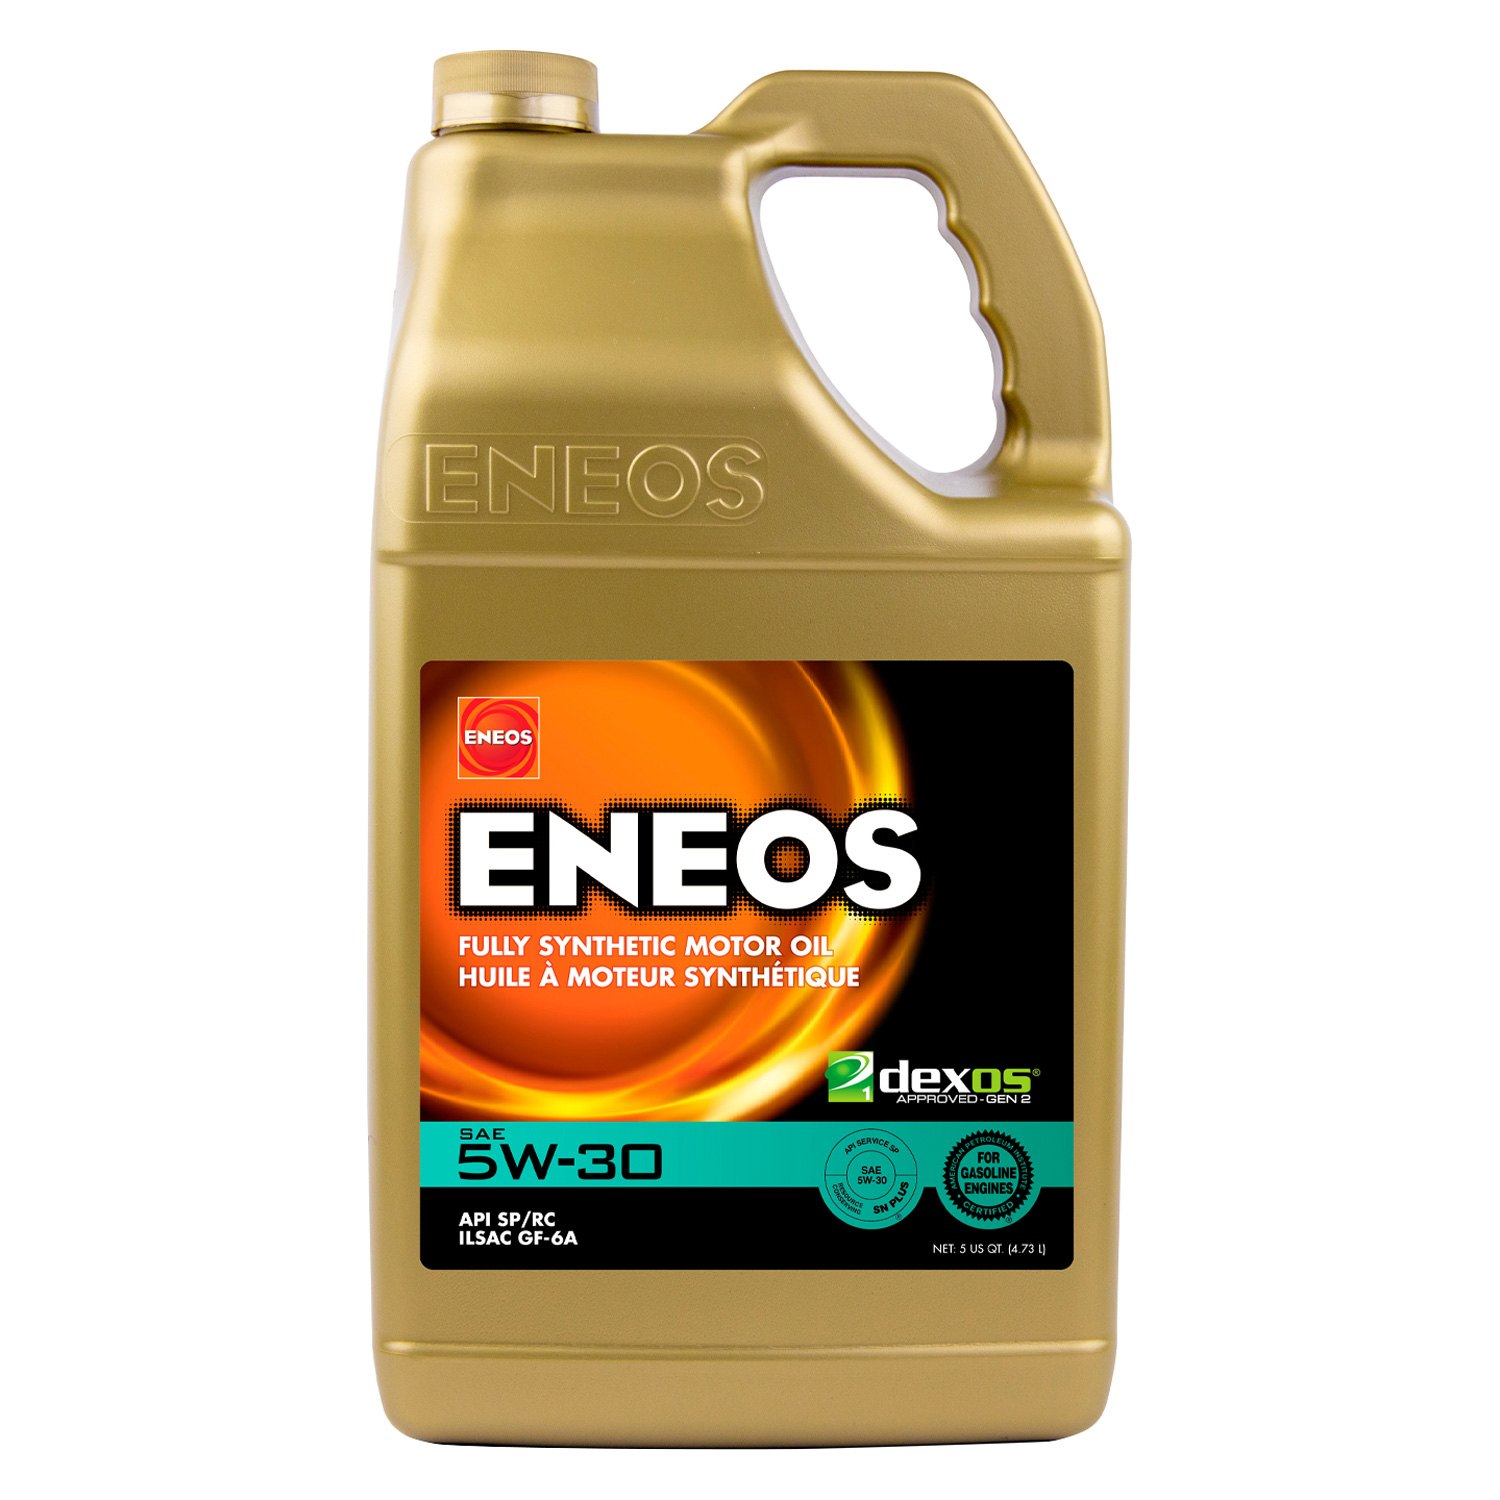 Eneos® - Mercedes C Class 2016 SAE 5W-30 Full Synthetic Motor Oil